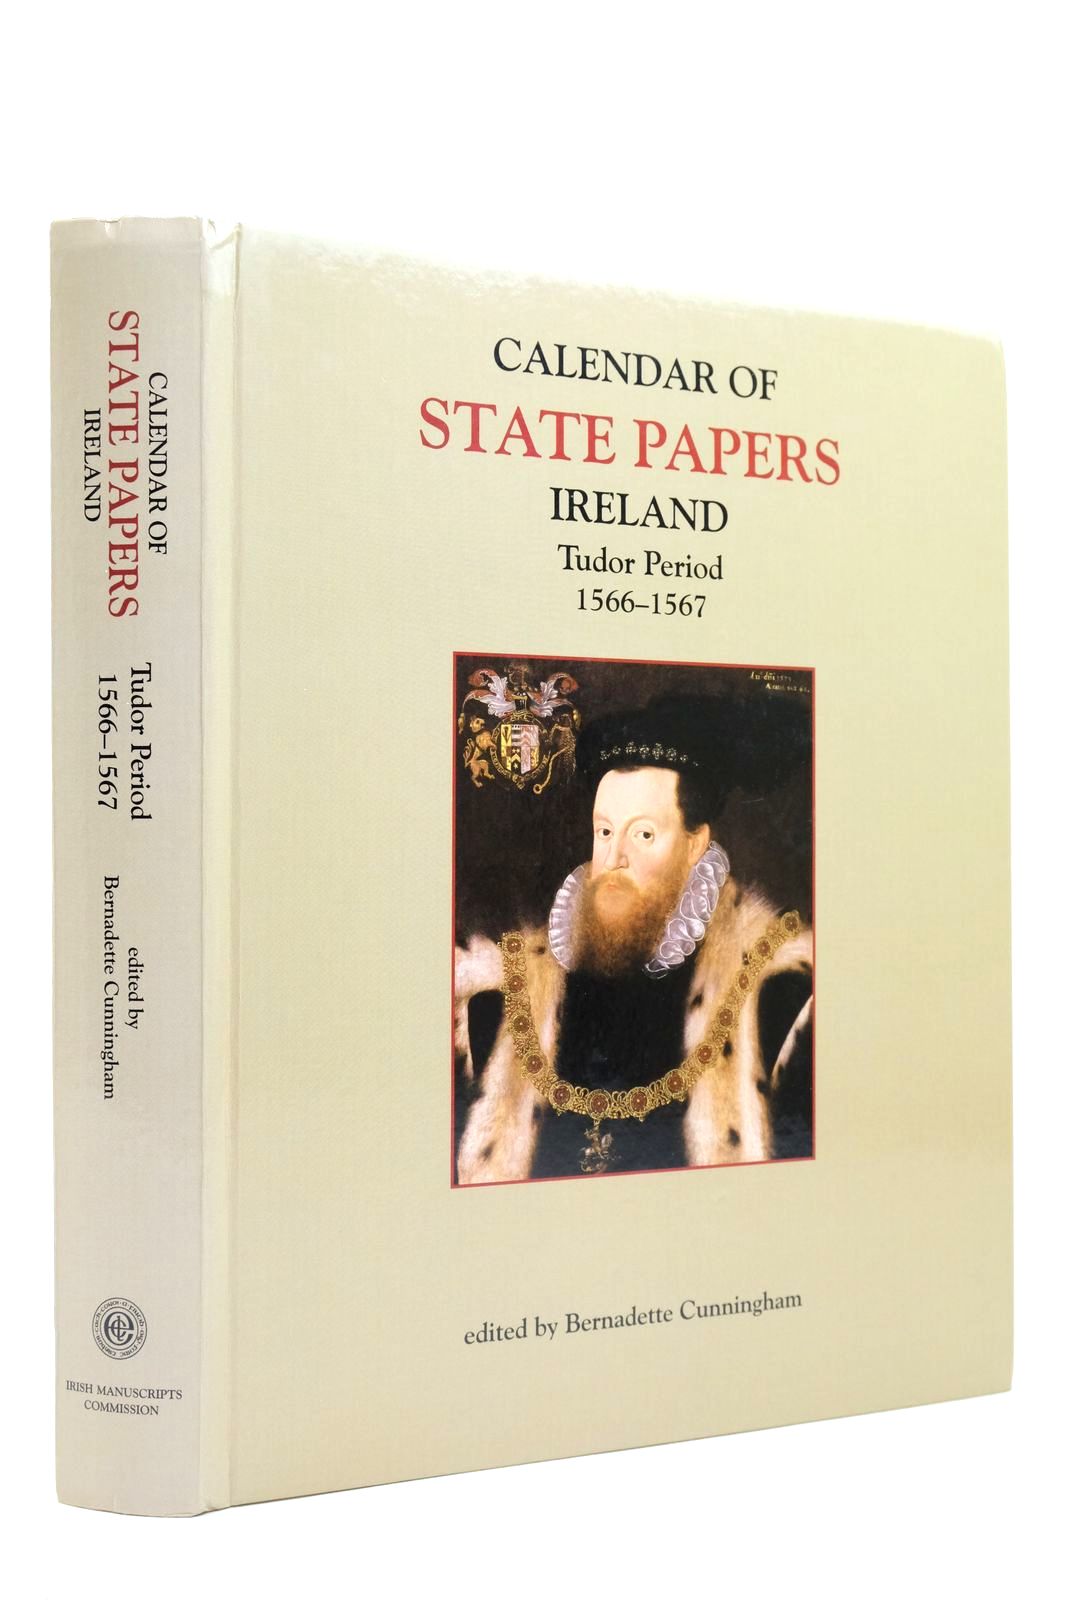 Photo of CALENDAR OF STATE PAPERS IRELAND: TUDOR PERIOD 1566-1567 written by Cunningham, Bernadette published by Irish Manuscripts Commission (STOCK CODE: 2140639)  for sale by Stella & Rose's Books